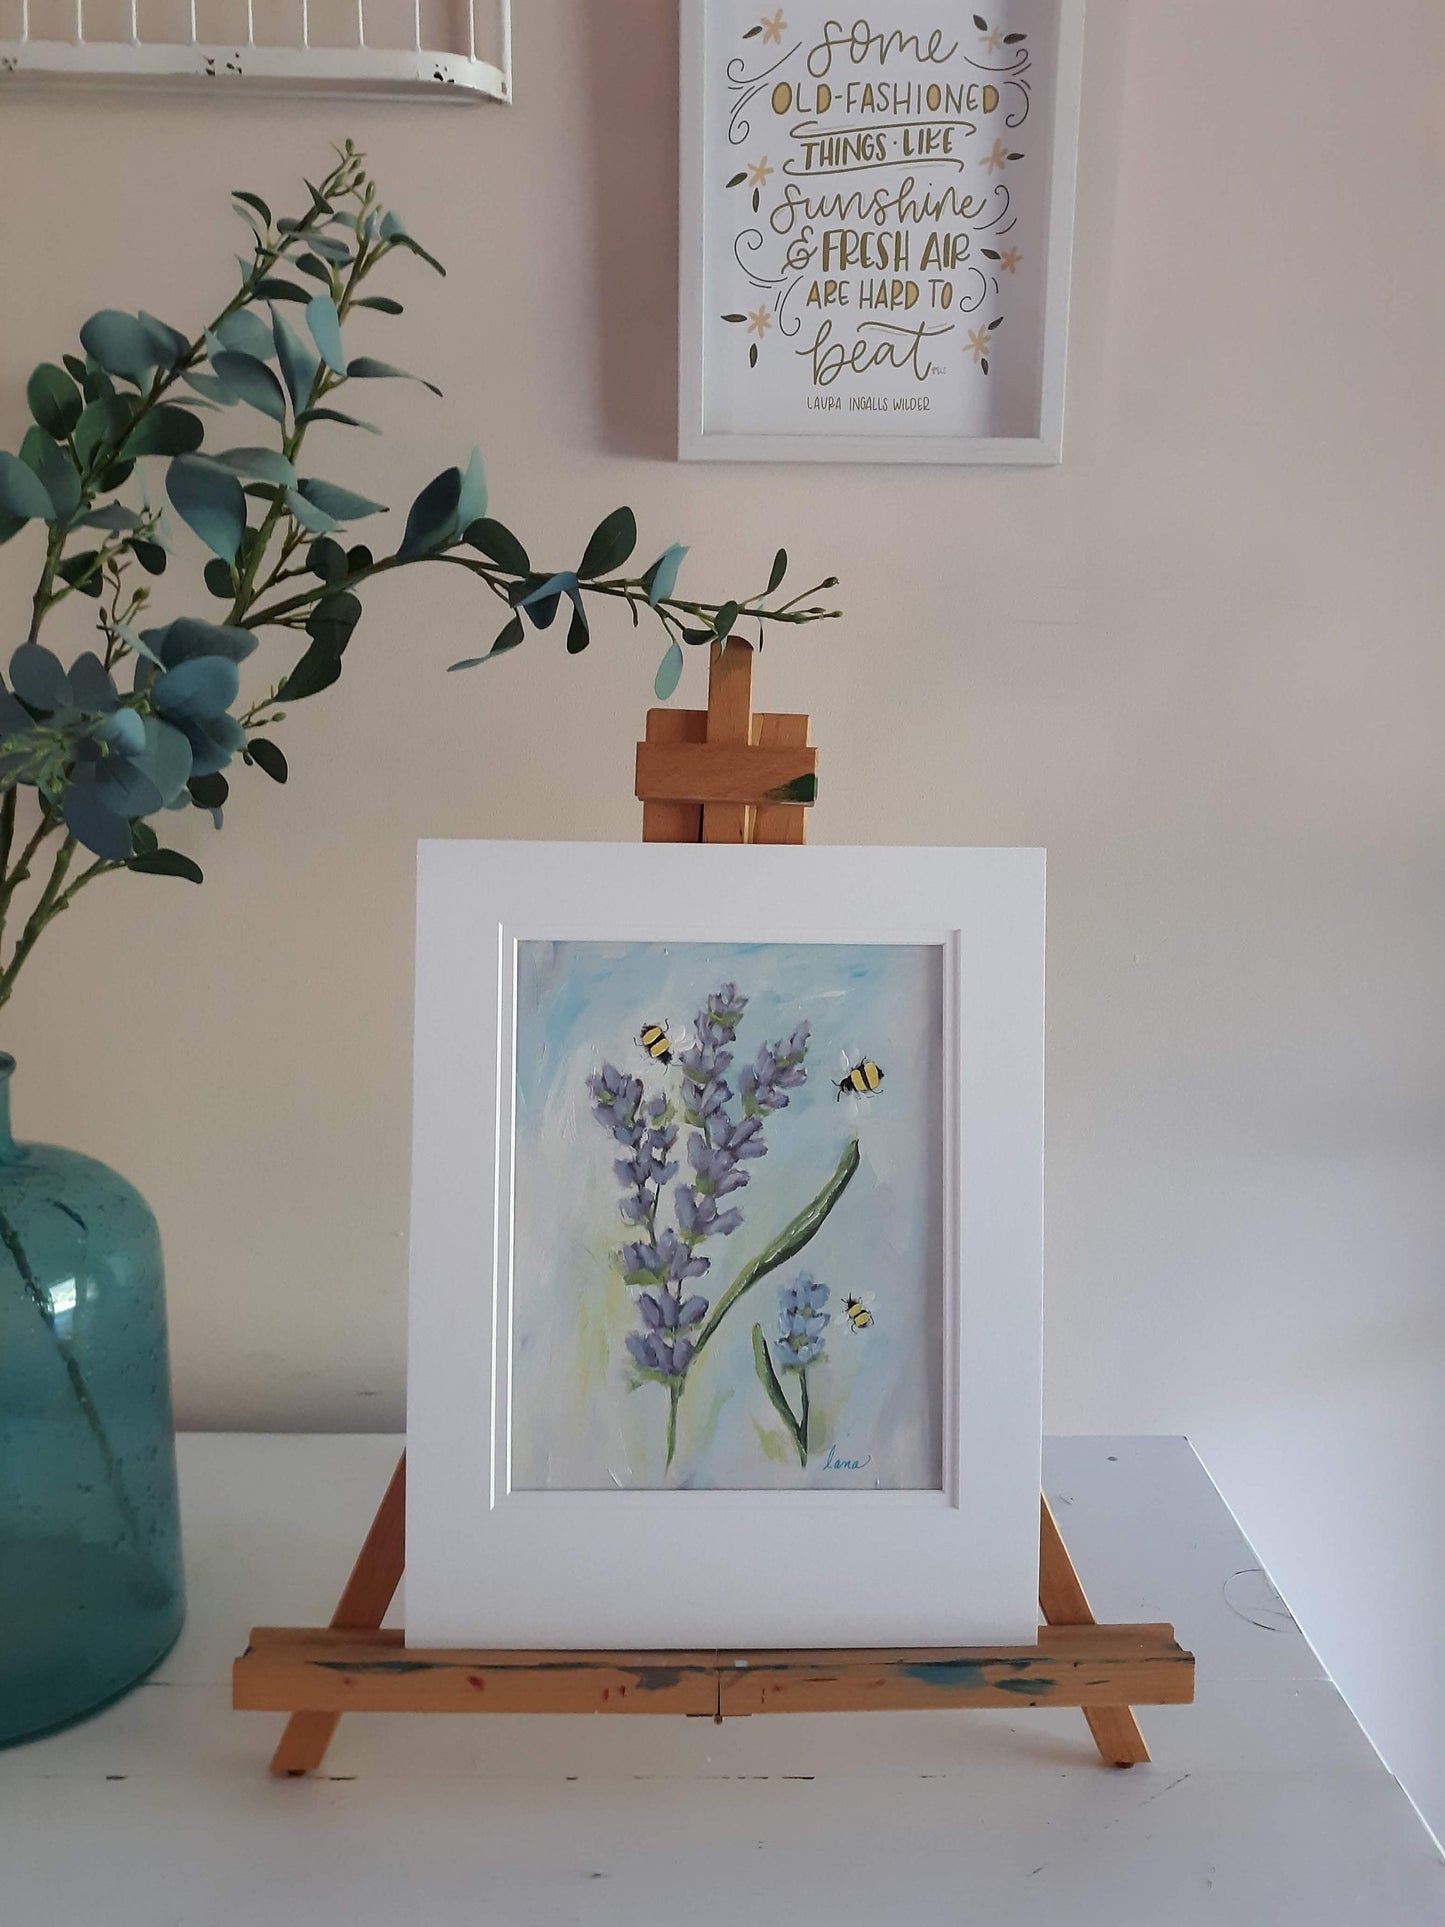 Lolly-gagging in Lavender Painting